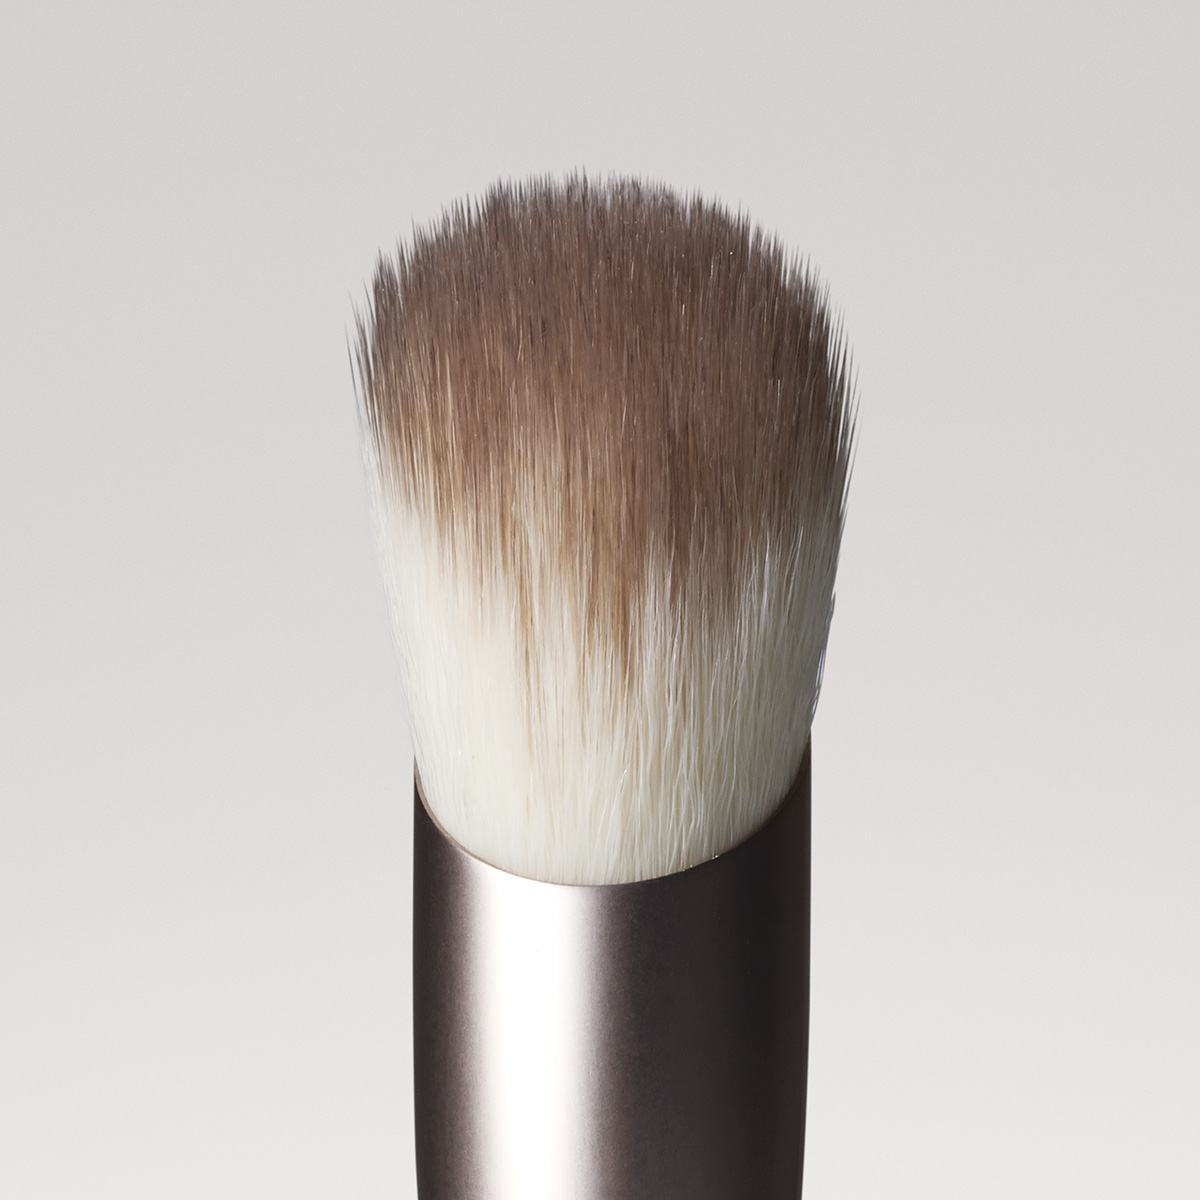 Close up image of the bristles on the Rose Inc Number 2 Blush Brush